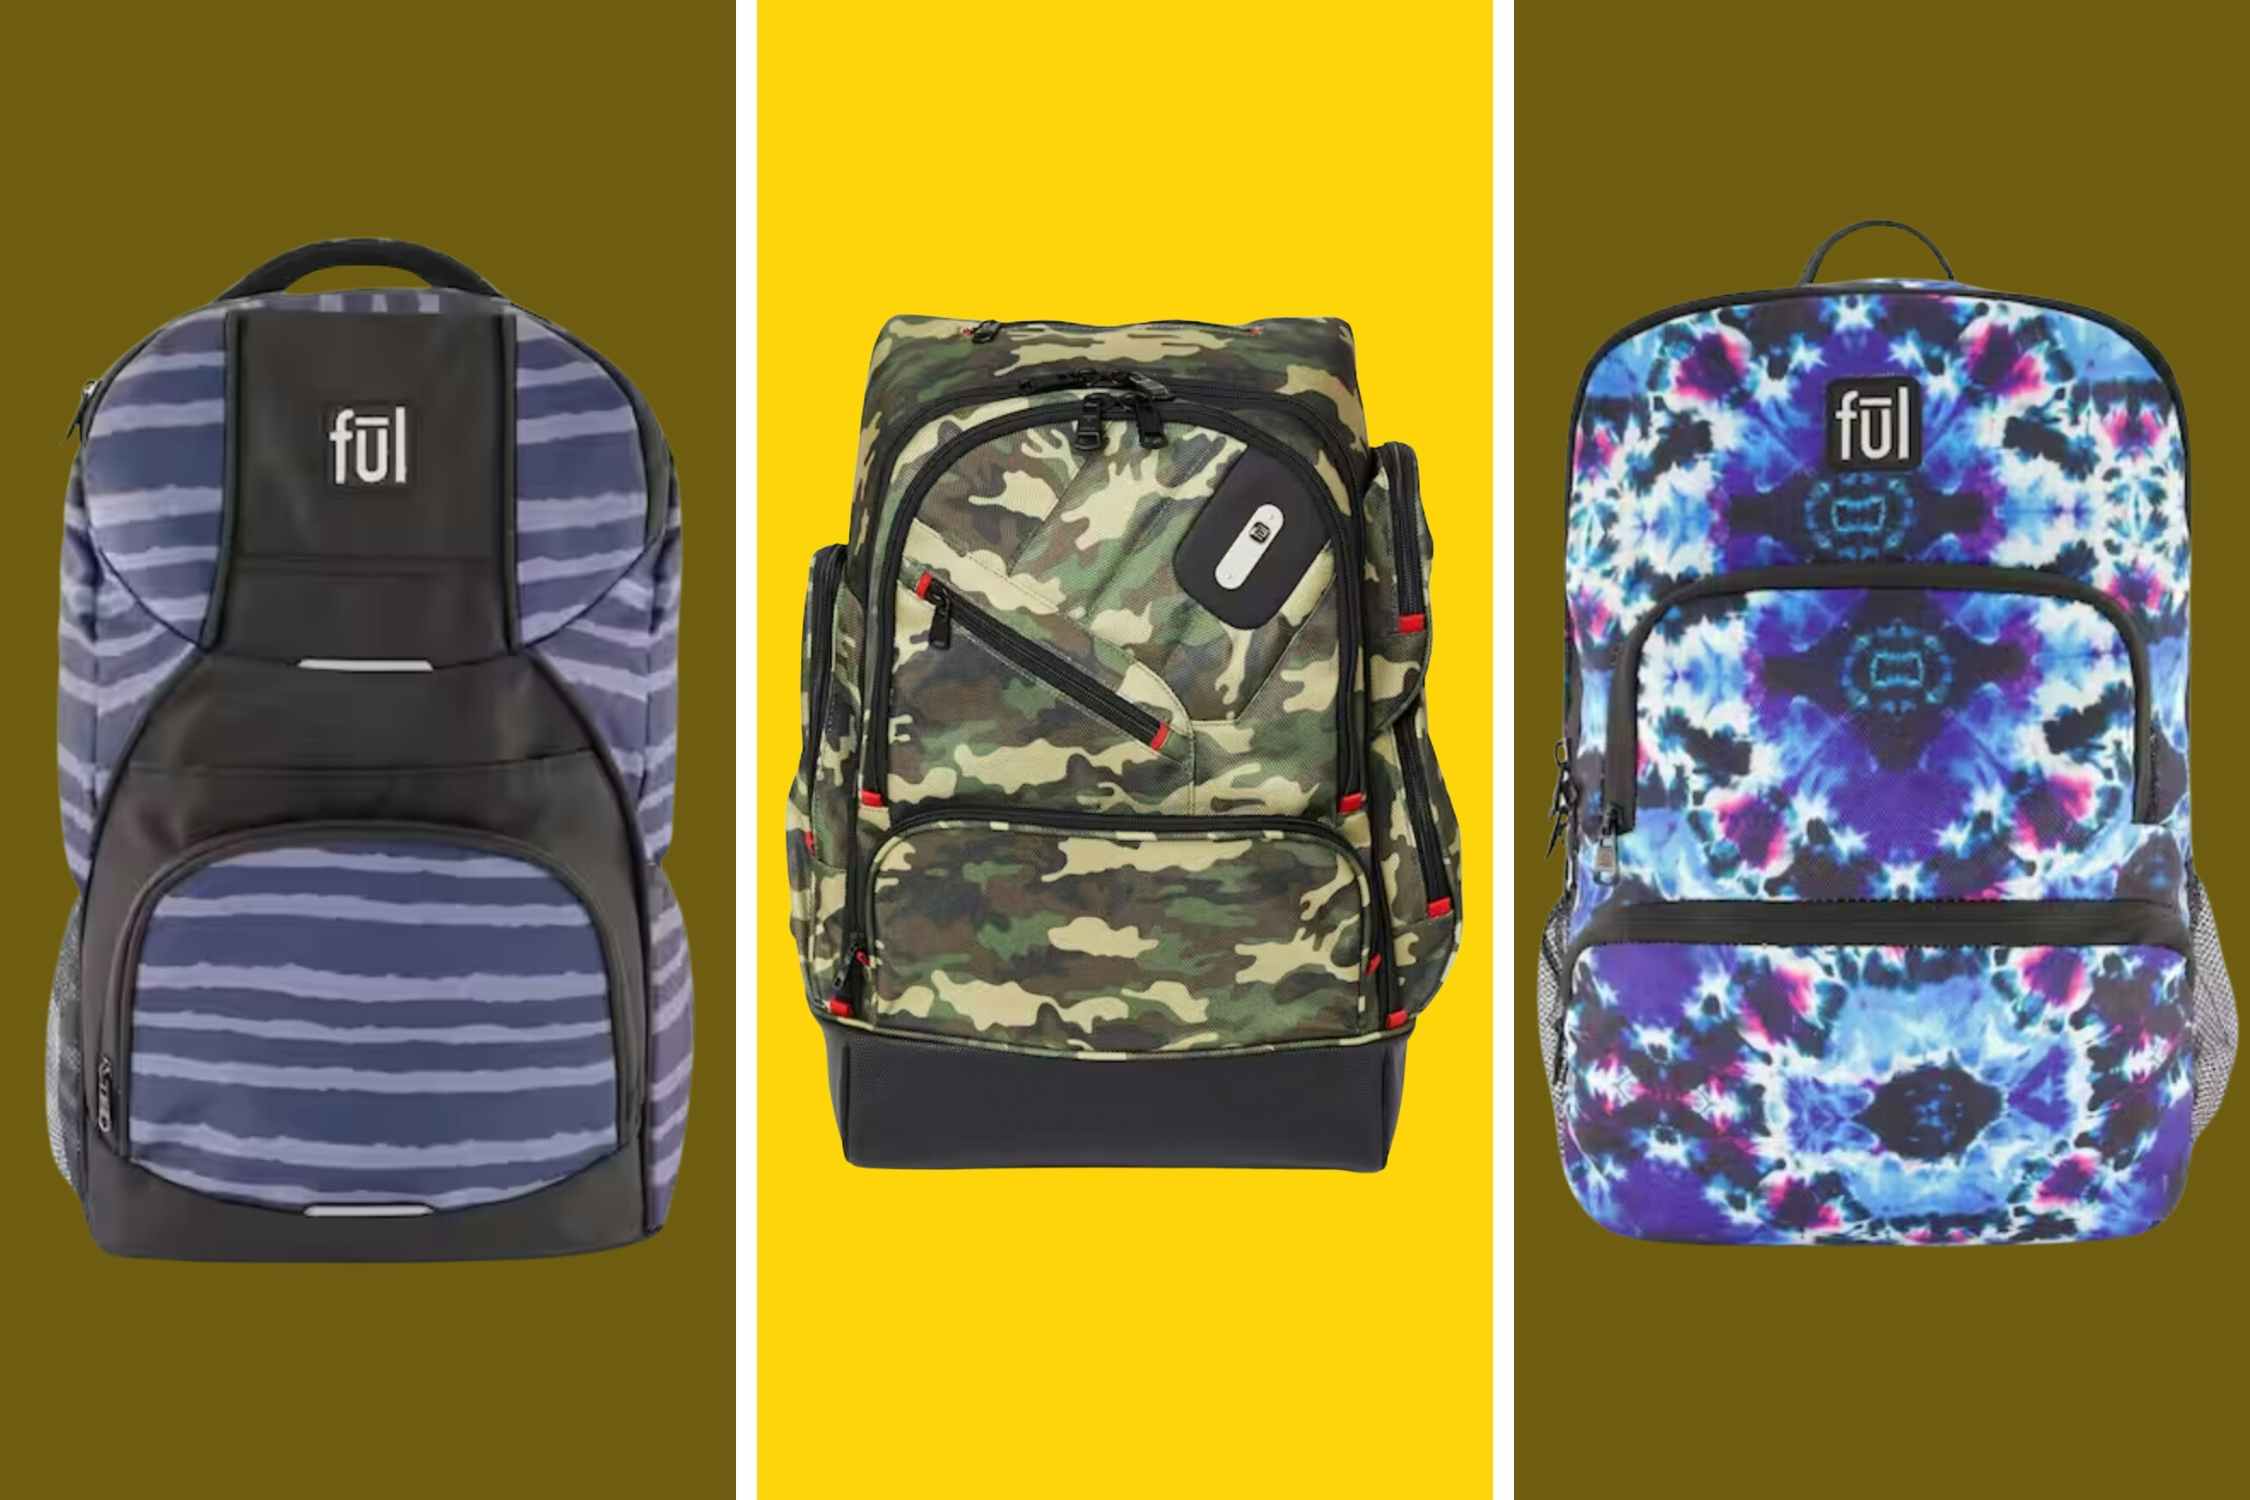 Ful Backpacks, Starting at $33 at Home Depot (Cheaper Than Other Retailers)